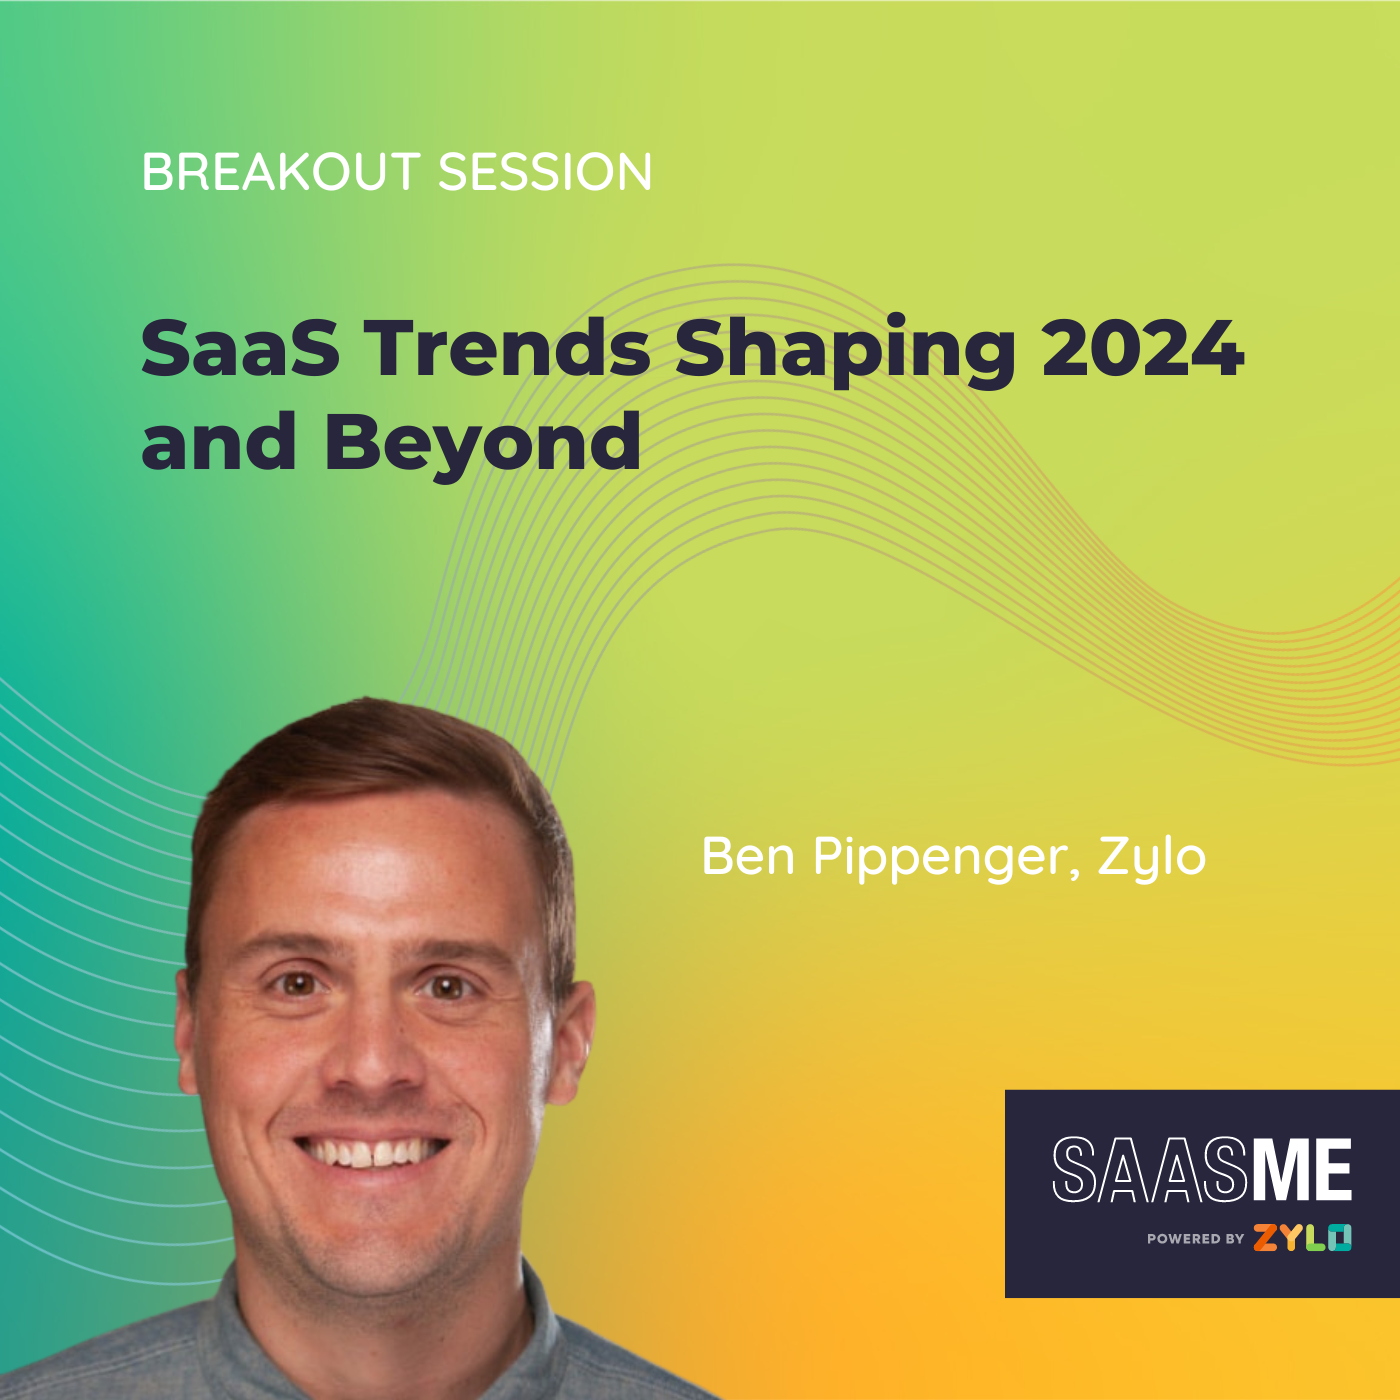 SaaS Trends Shaping 2024 and Beyond